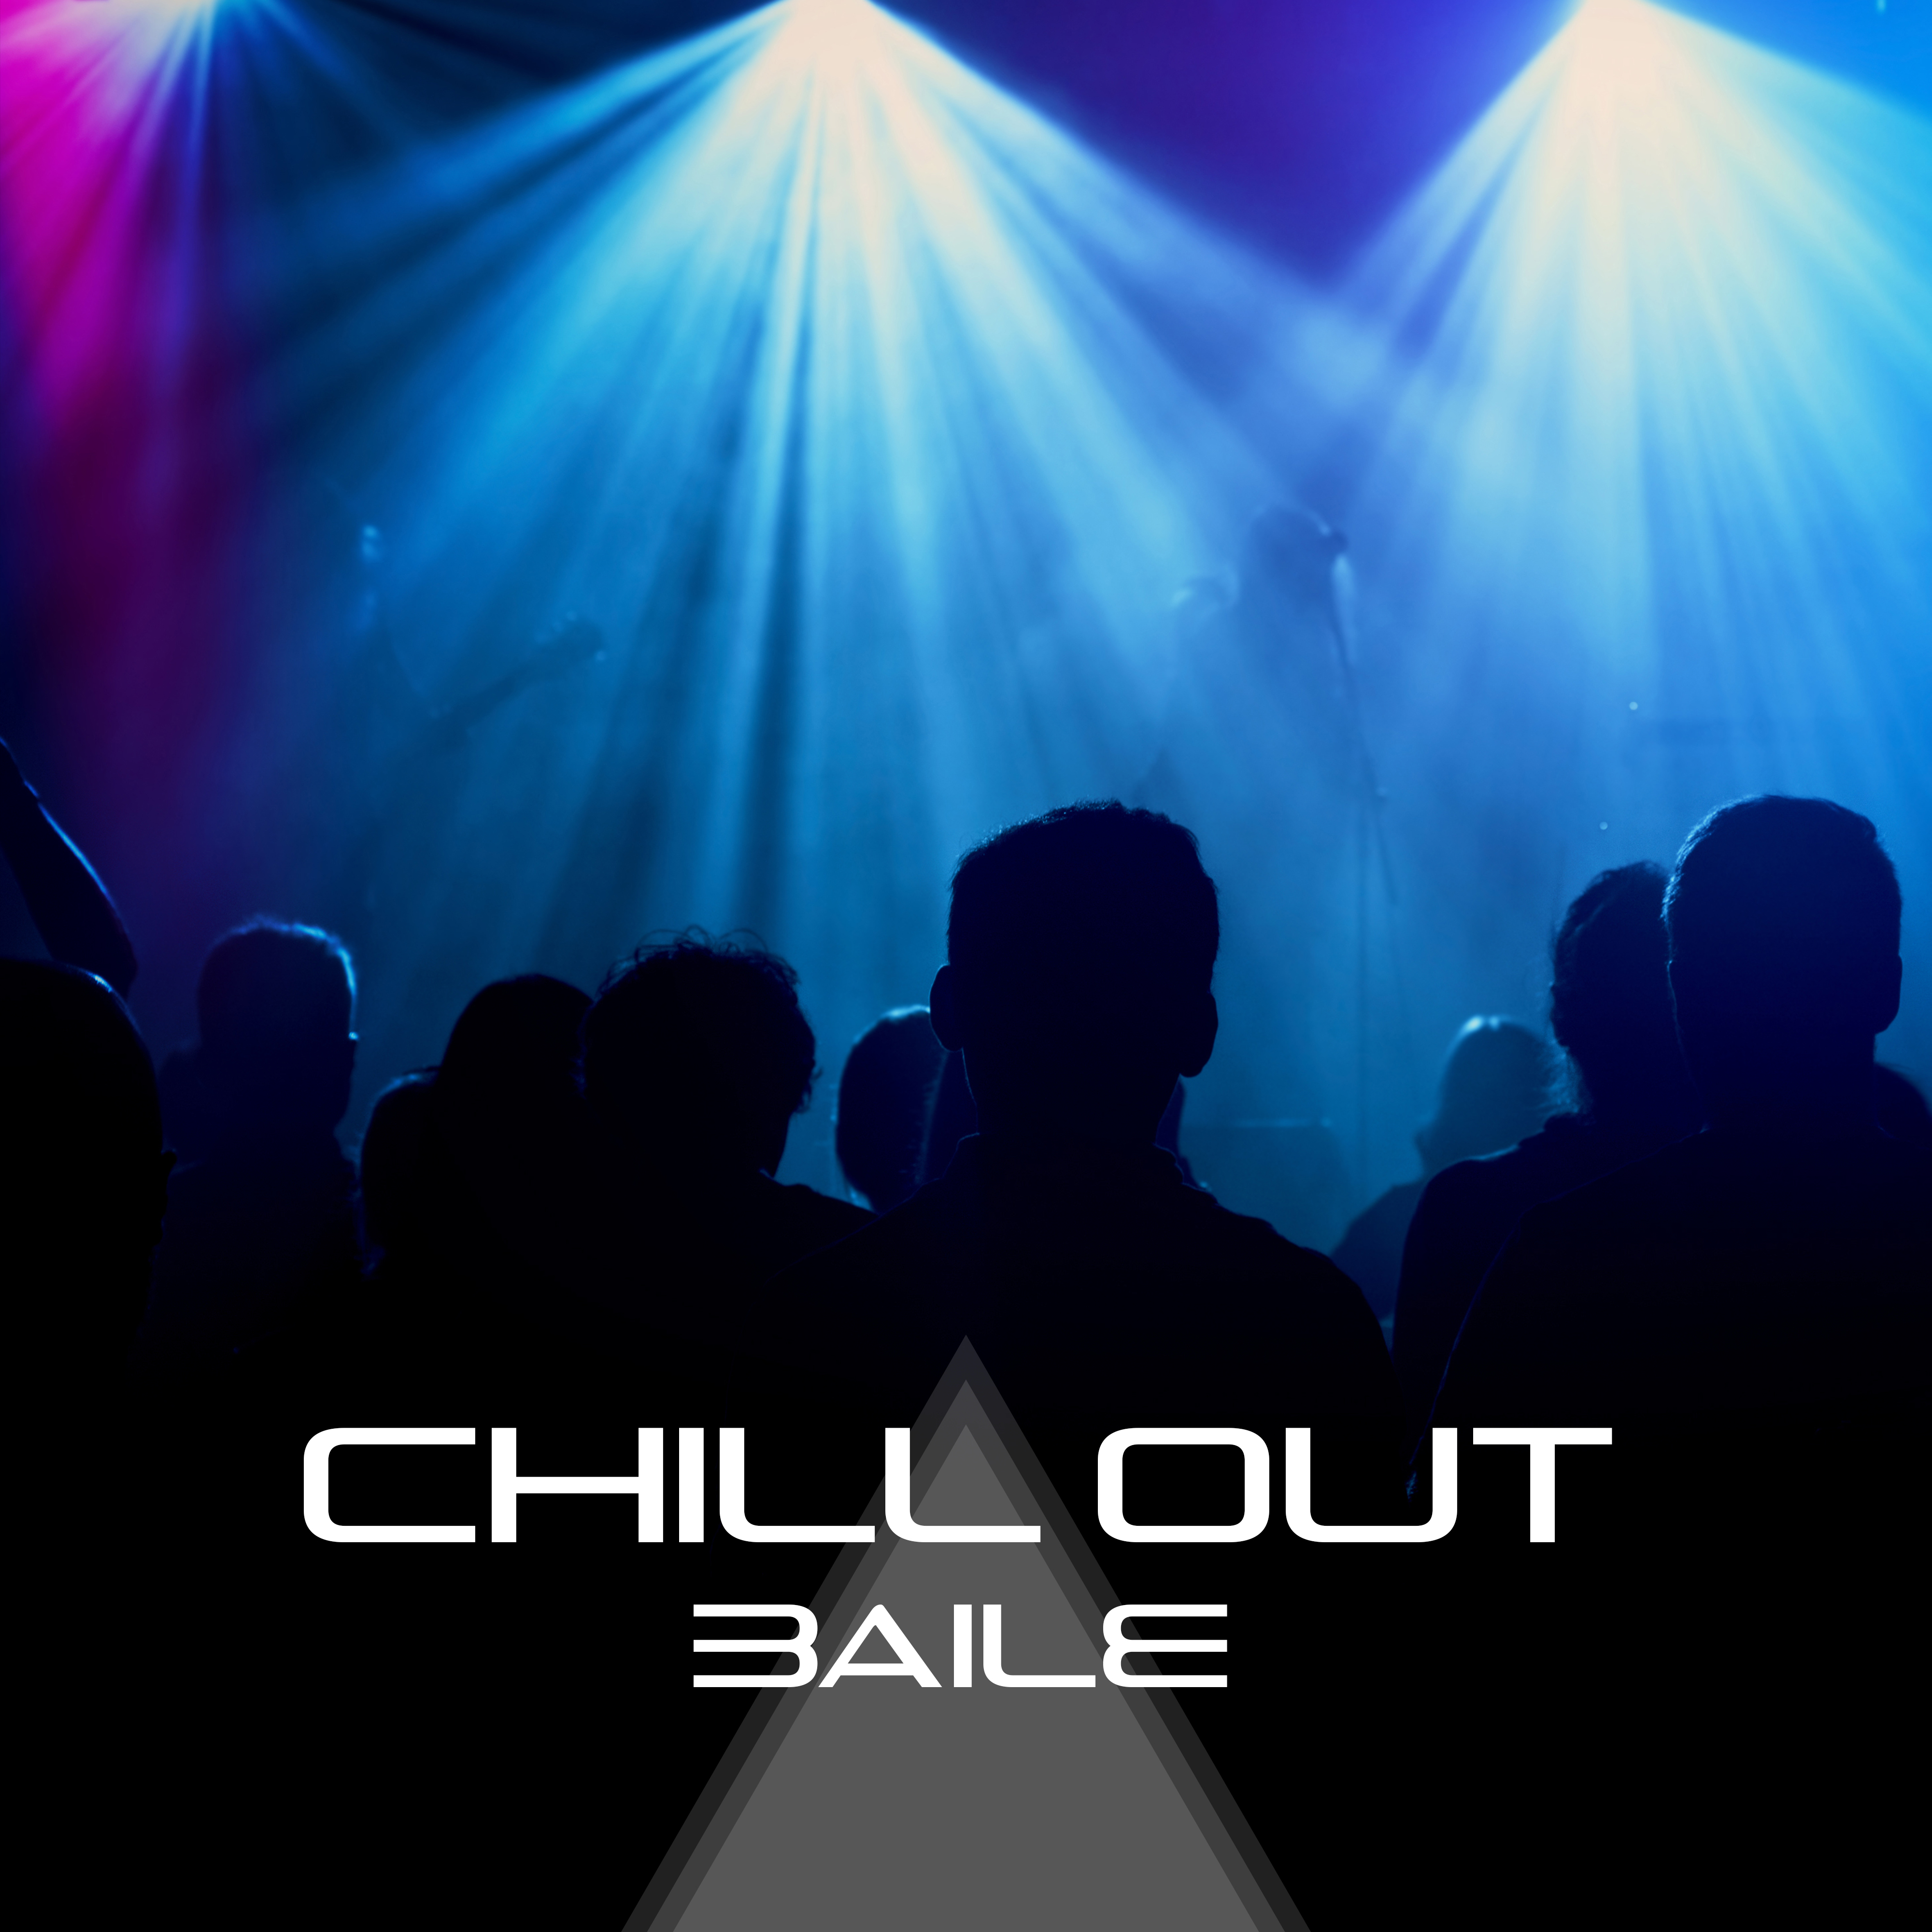 Chill Out Baile